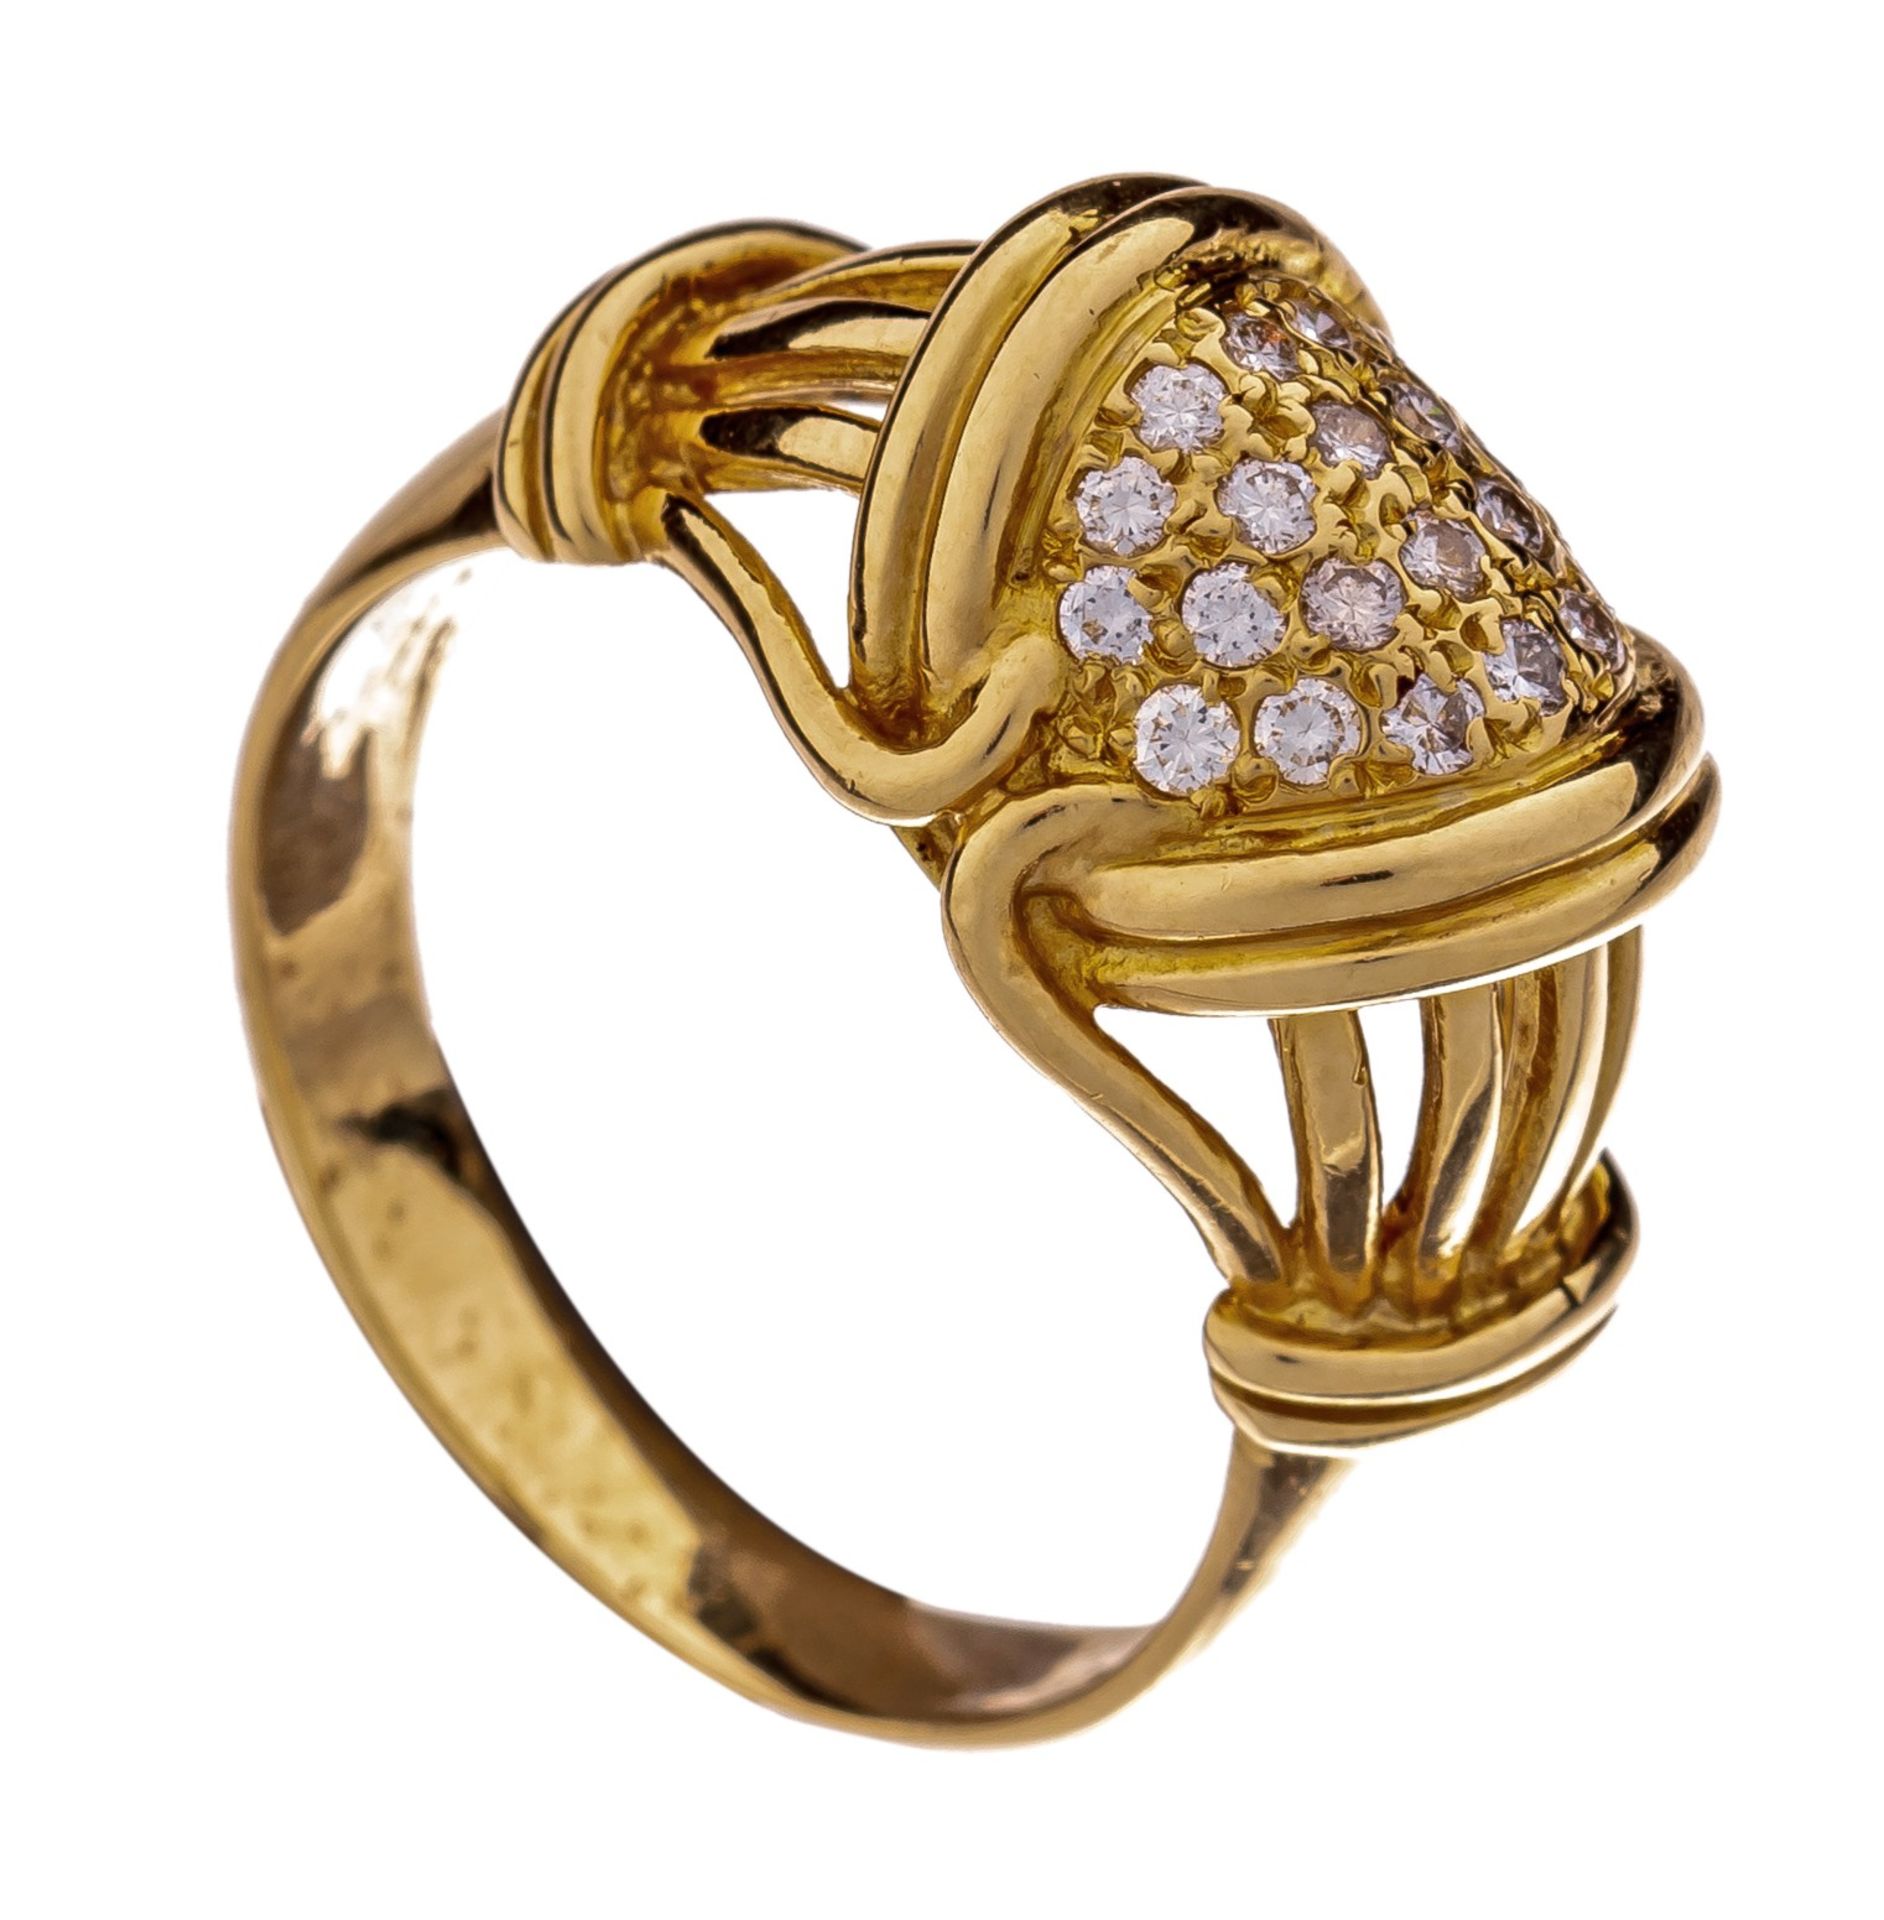 A ring in 18ct gold, set with 19 brilliant cut diamonds, 8,8 g